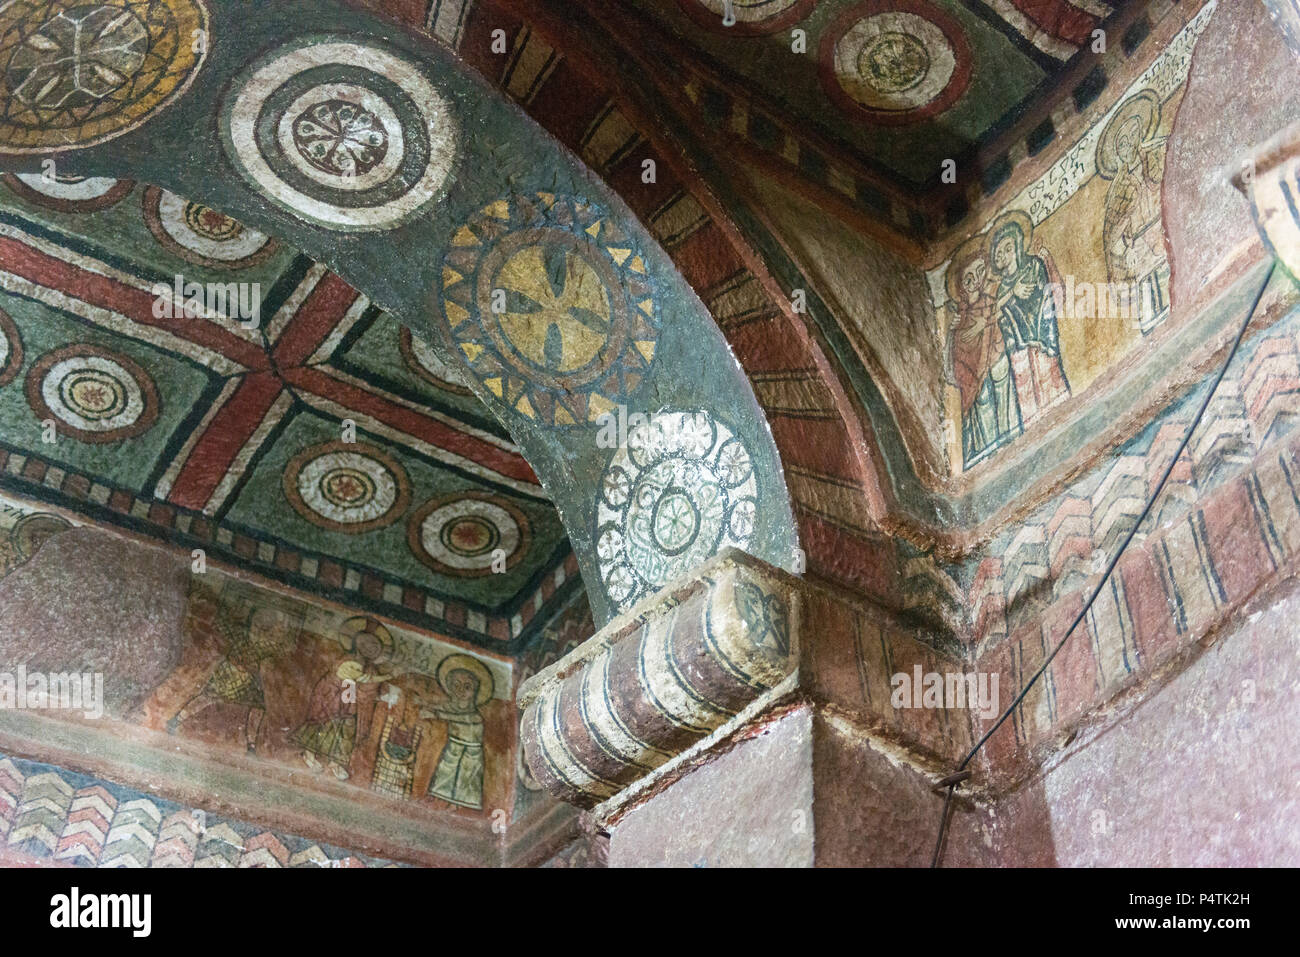 Decorated ceiling of the Mariam Church, the most decorated of the rock-cut churches of Lalibela. Stock Photo